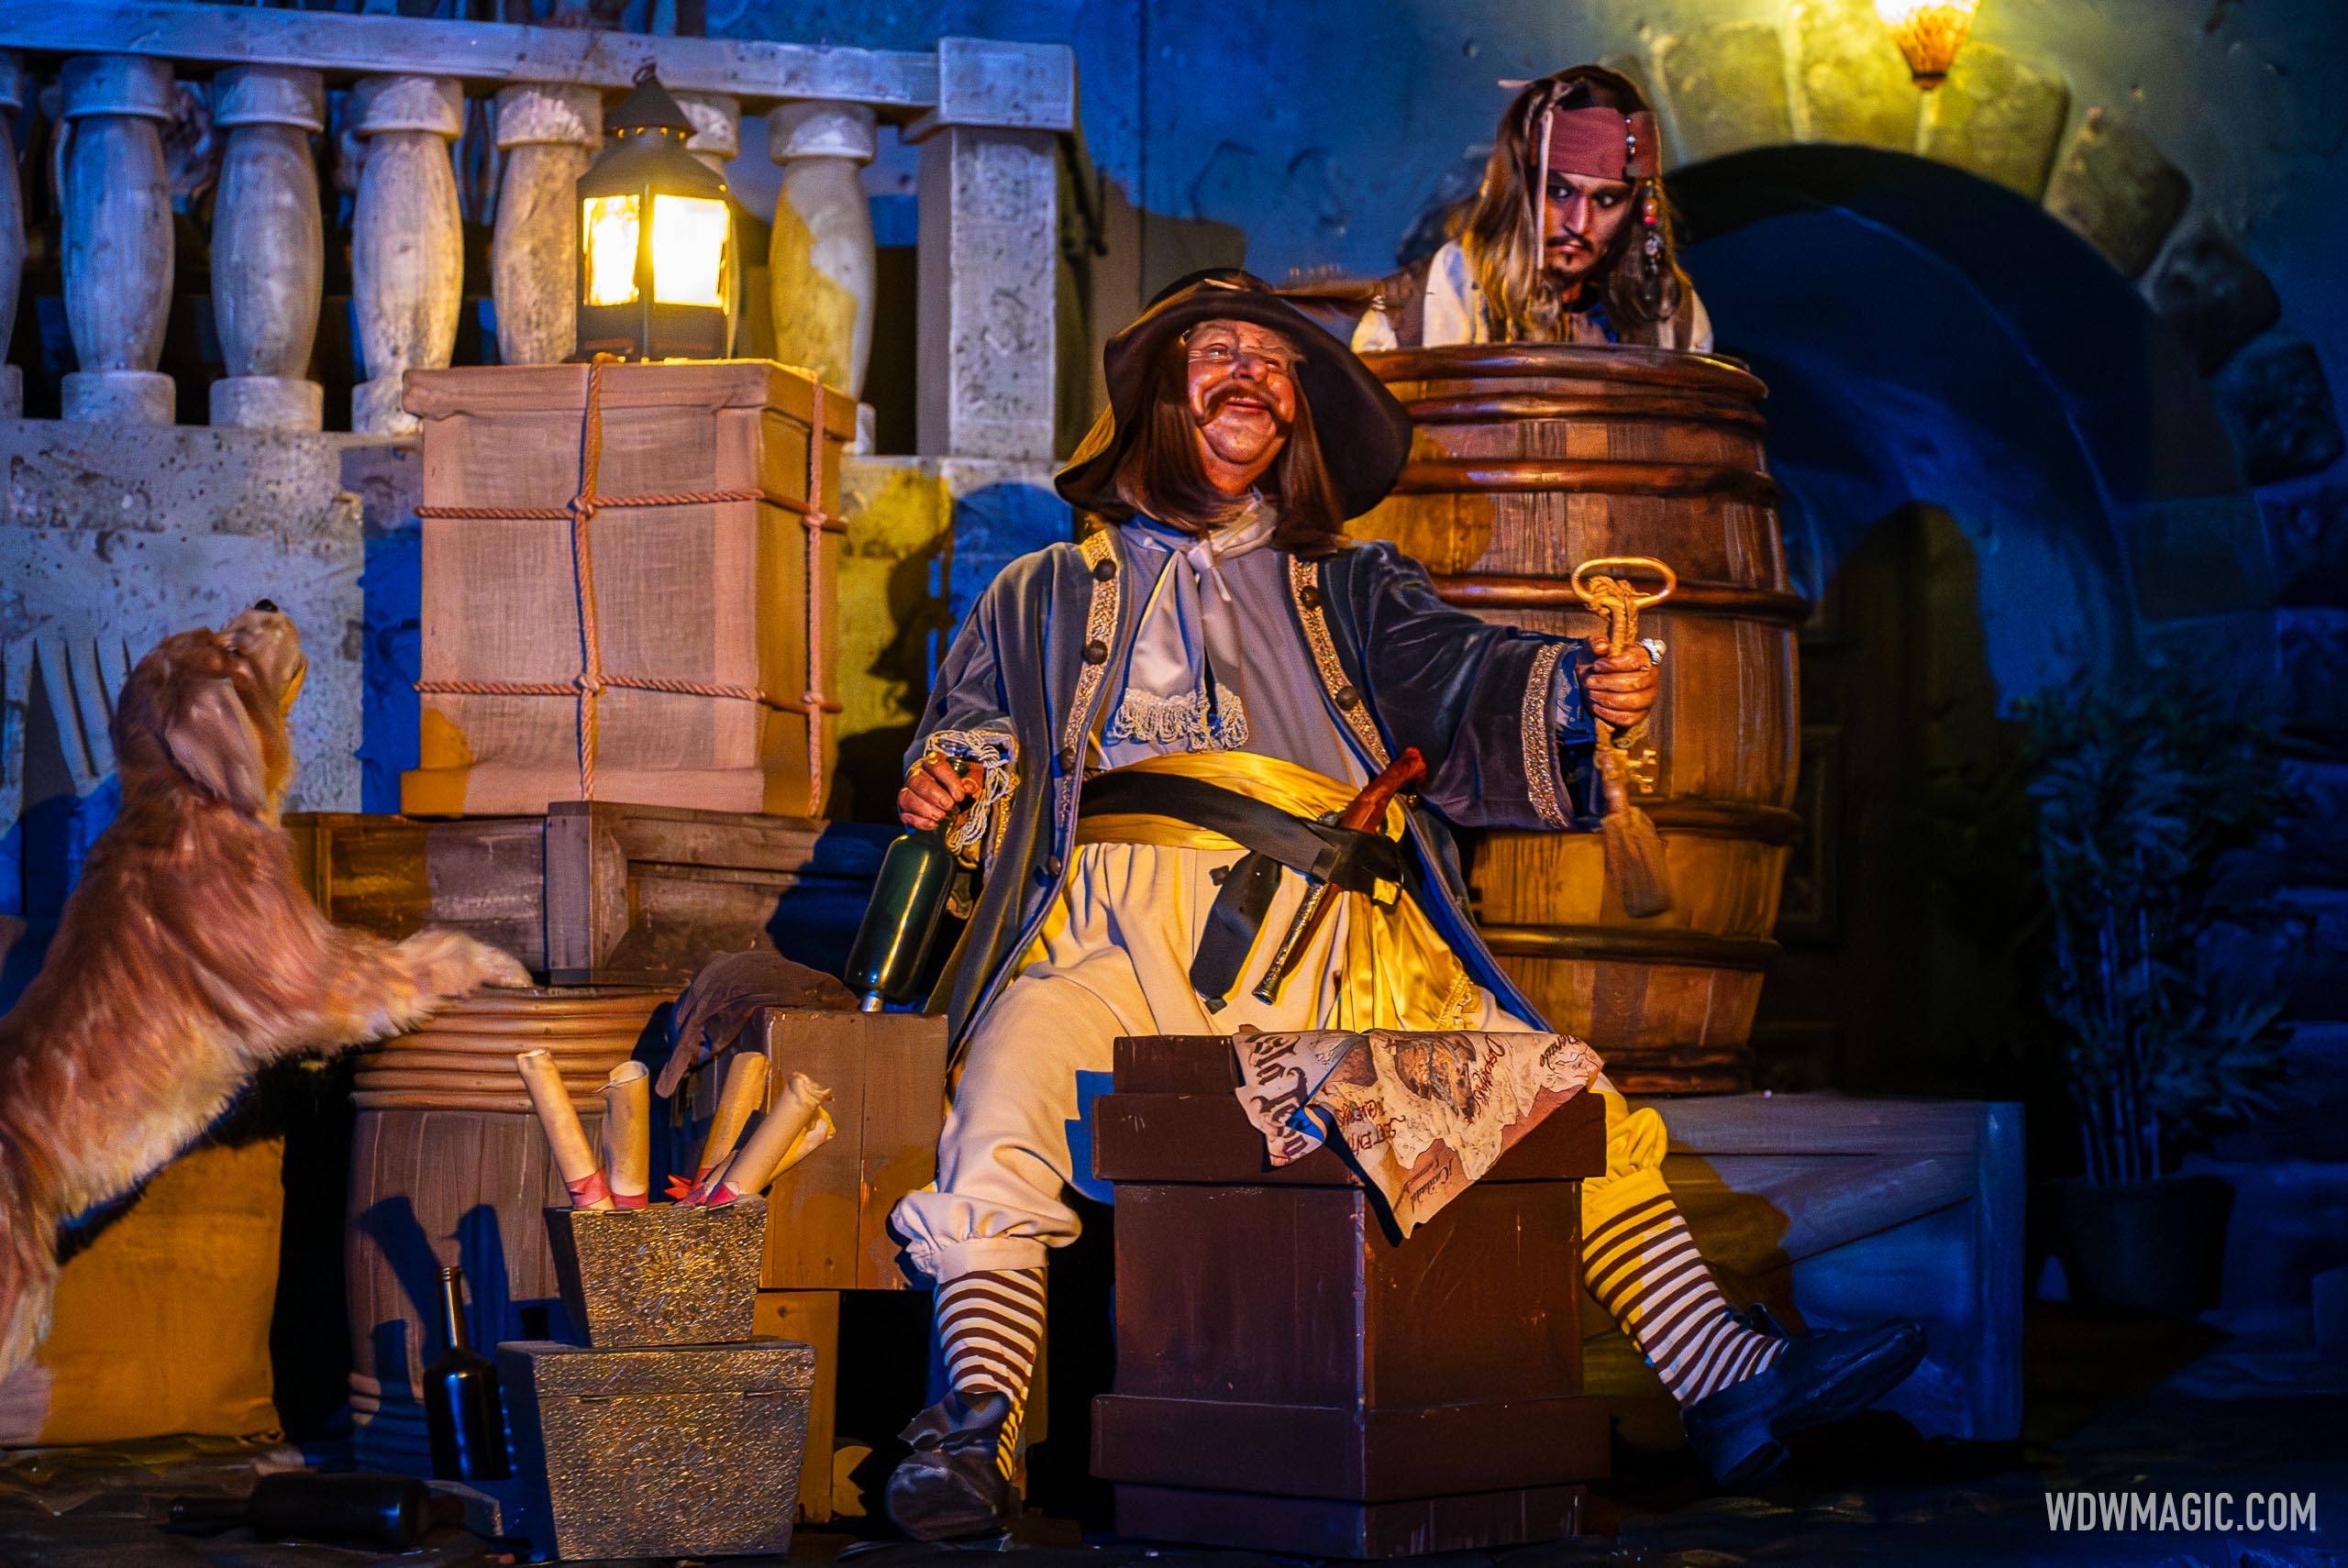 Short April refurbishment scheduled for Pirates of the Caribbean